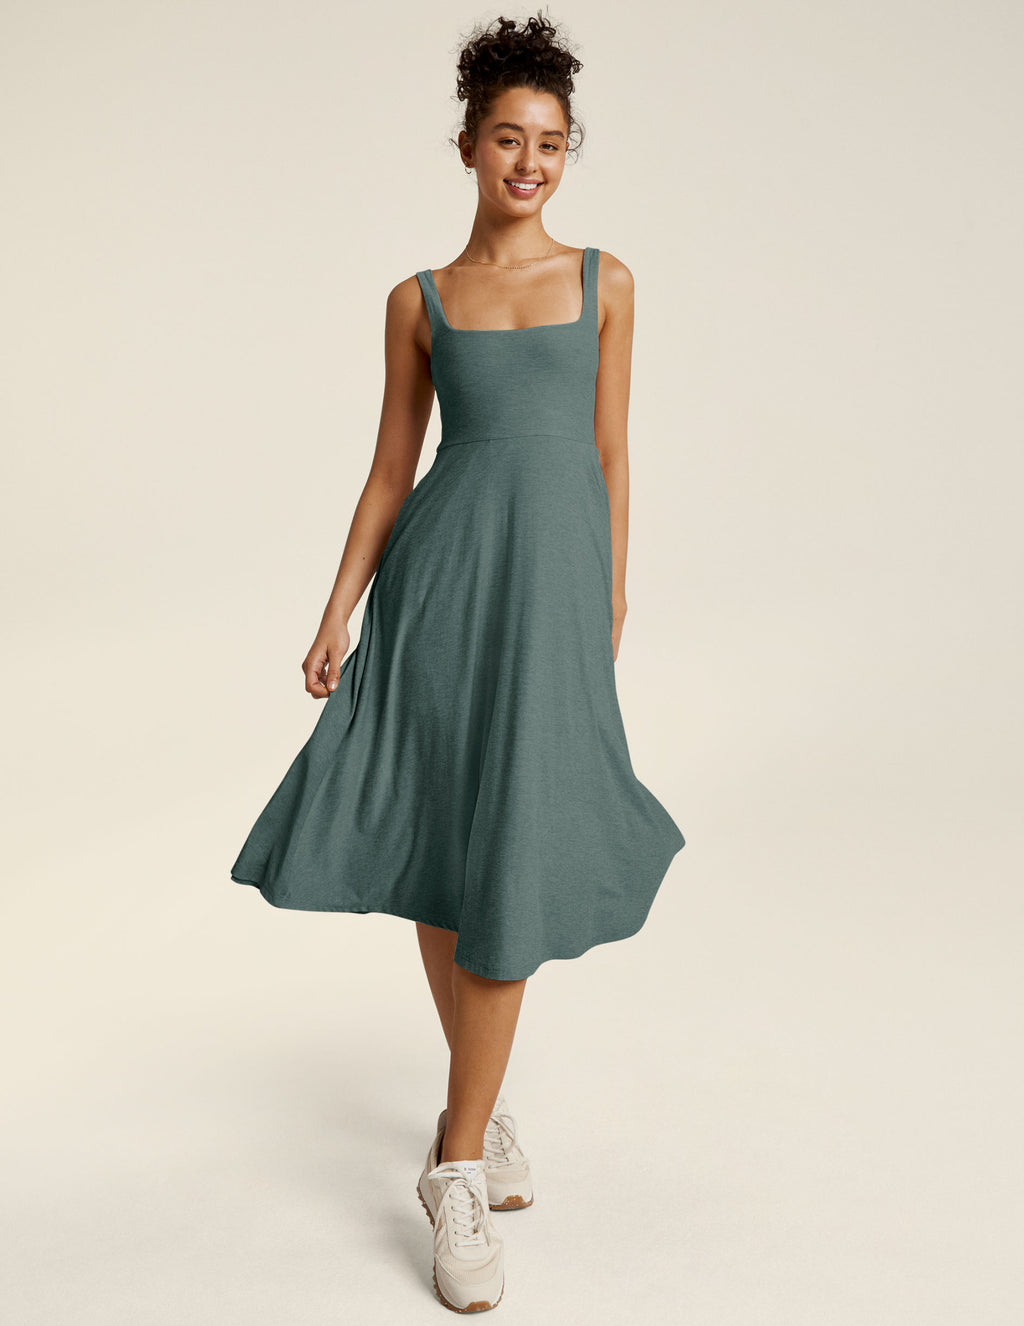 Featherweight At The Ready Square Neck Dress Featured Image